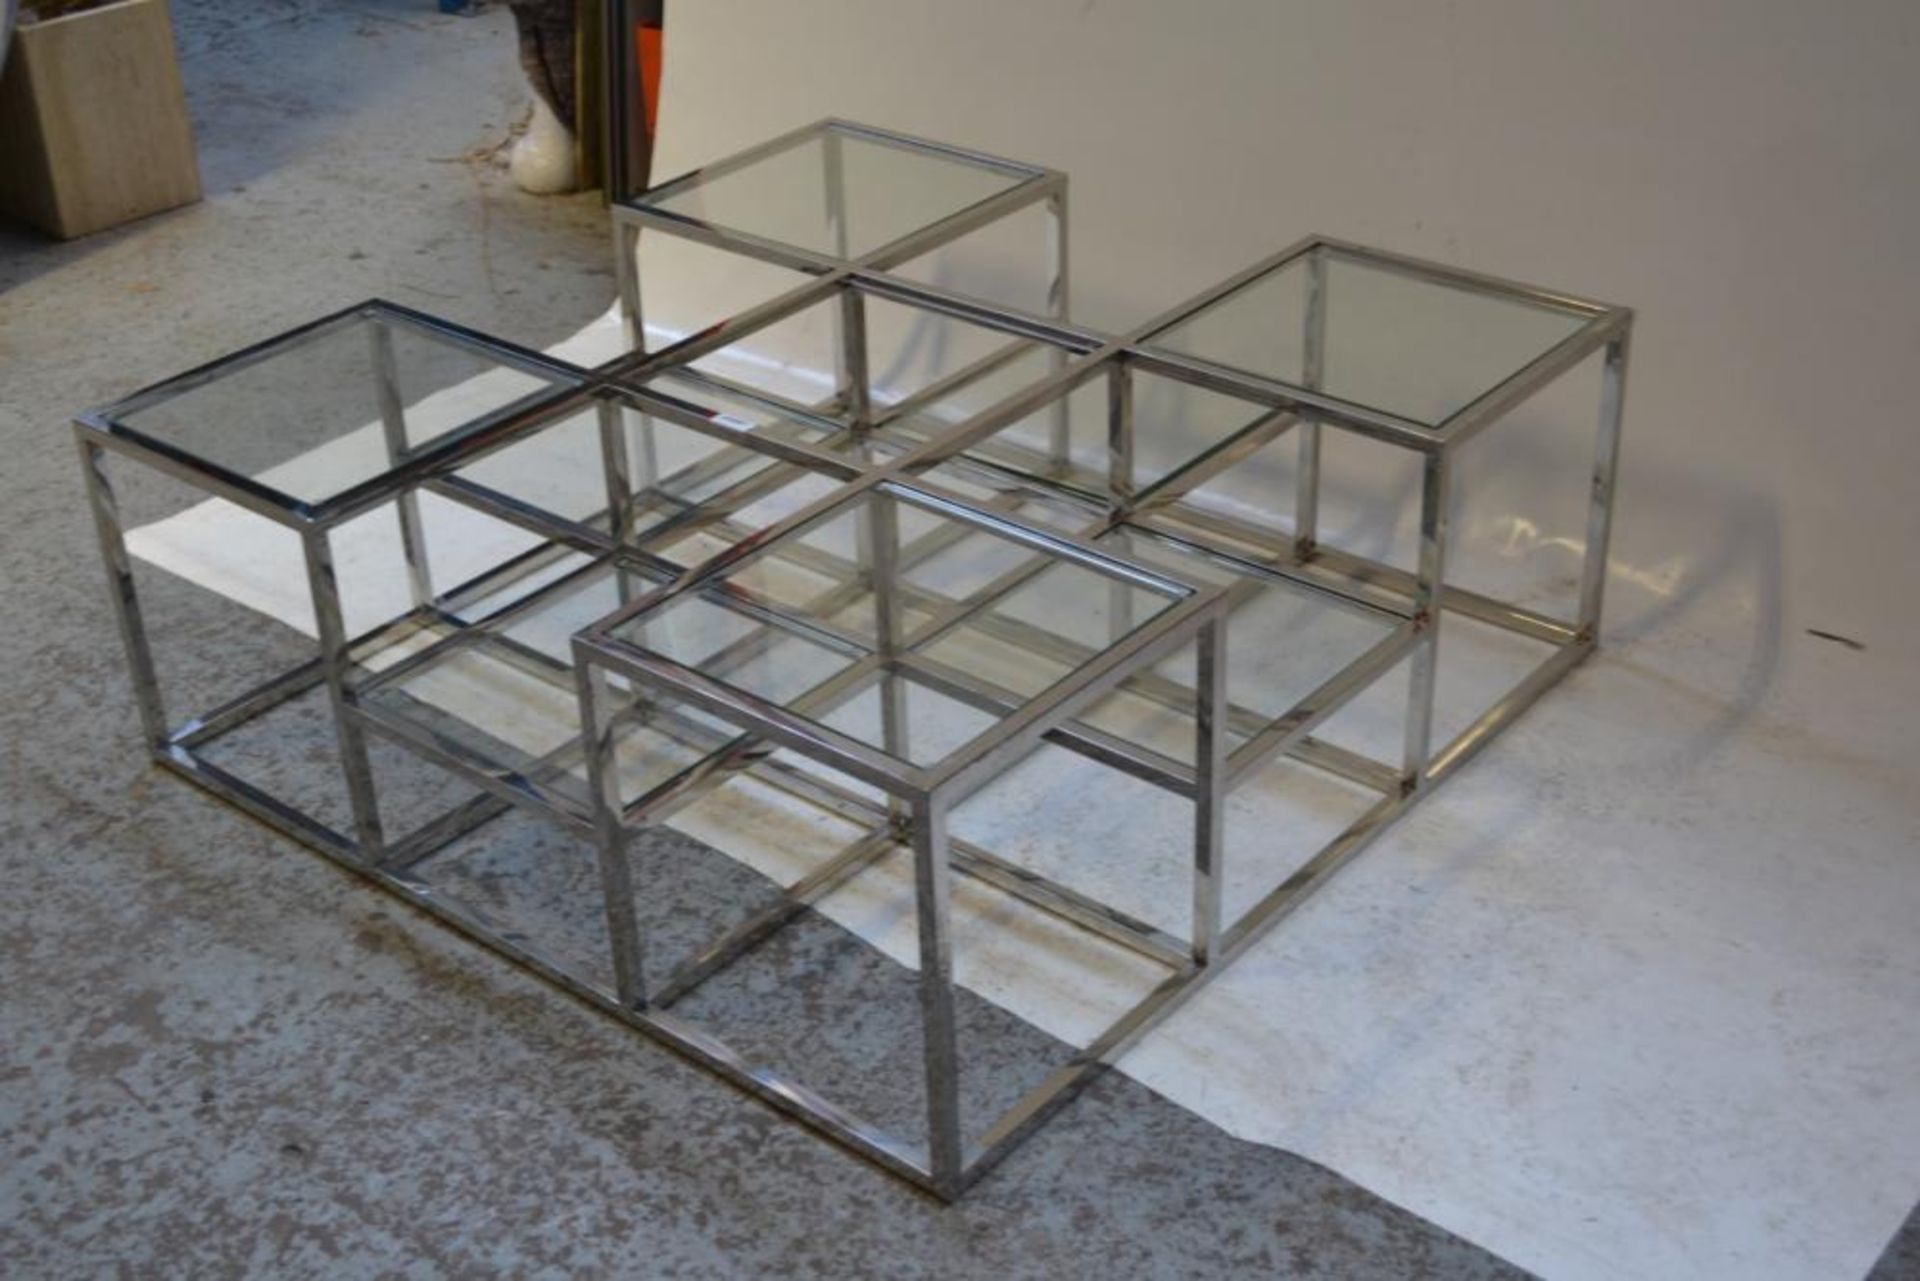 1 x EX DISPLAY METAL AND GLASS MULTI COFFEE TABLE - CL364 - Ref:WH- J2287 - Location: Altrincham WA1 - Image 3 of 4